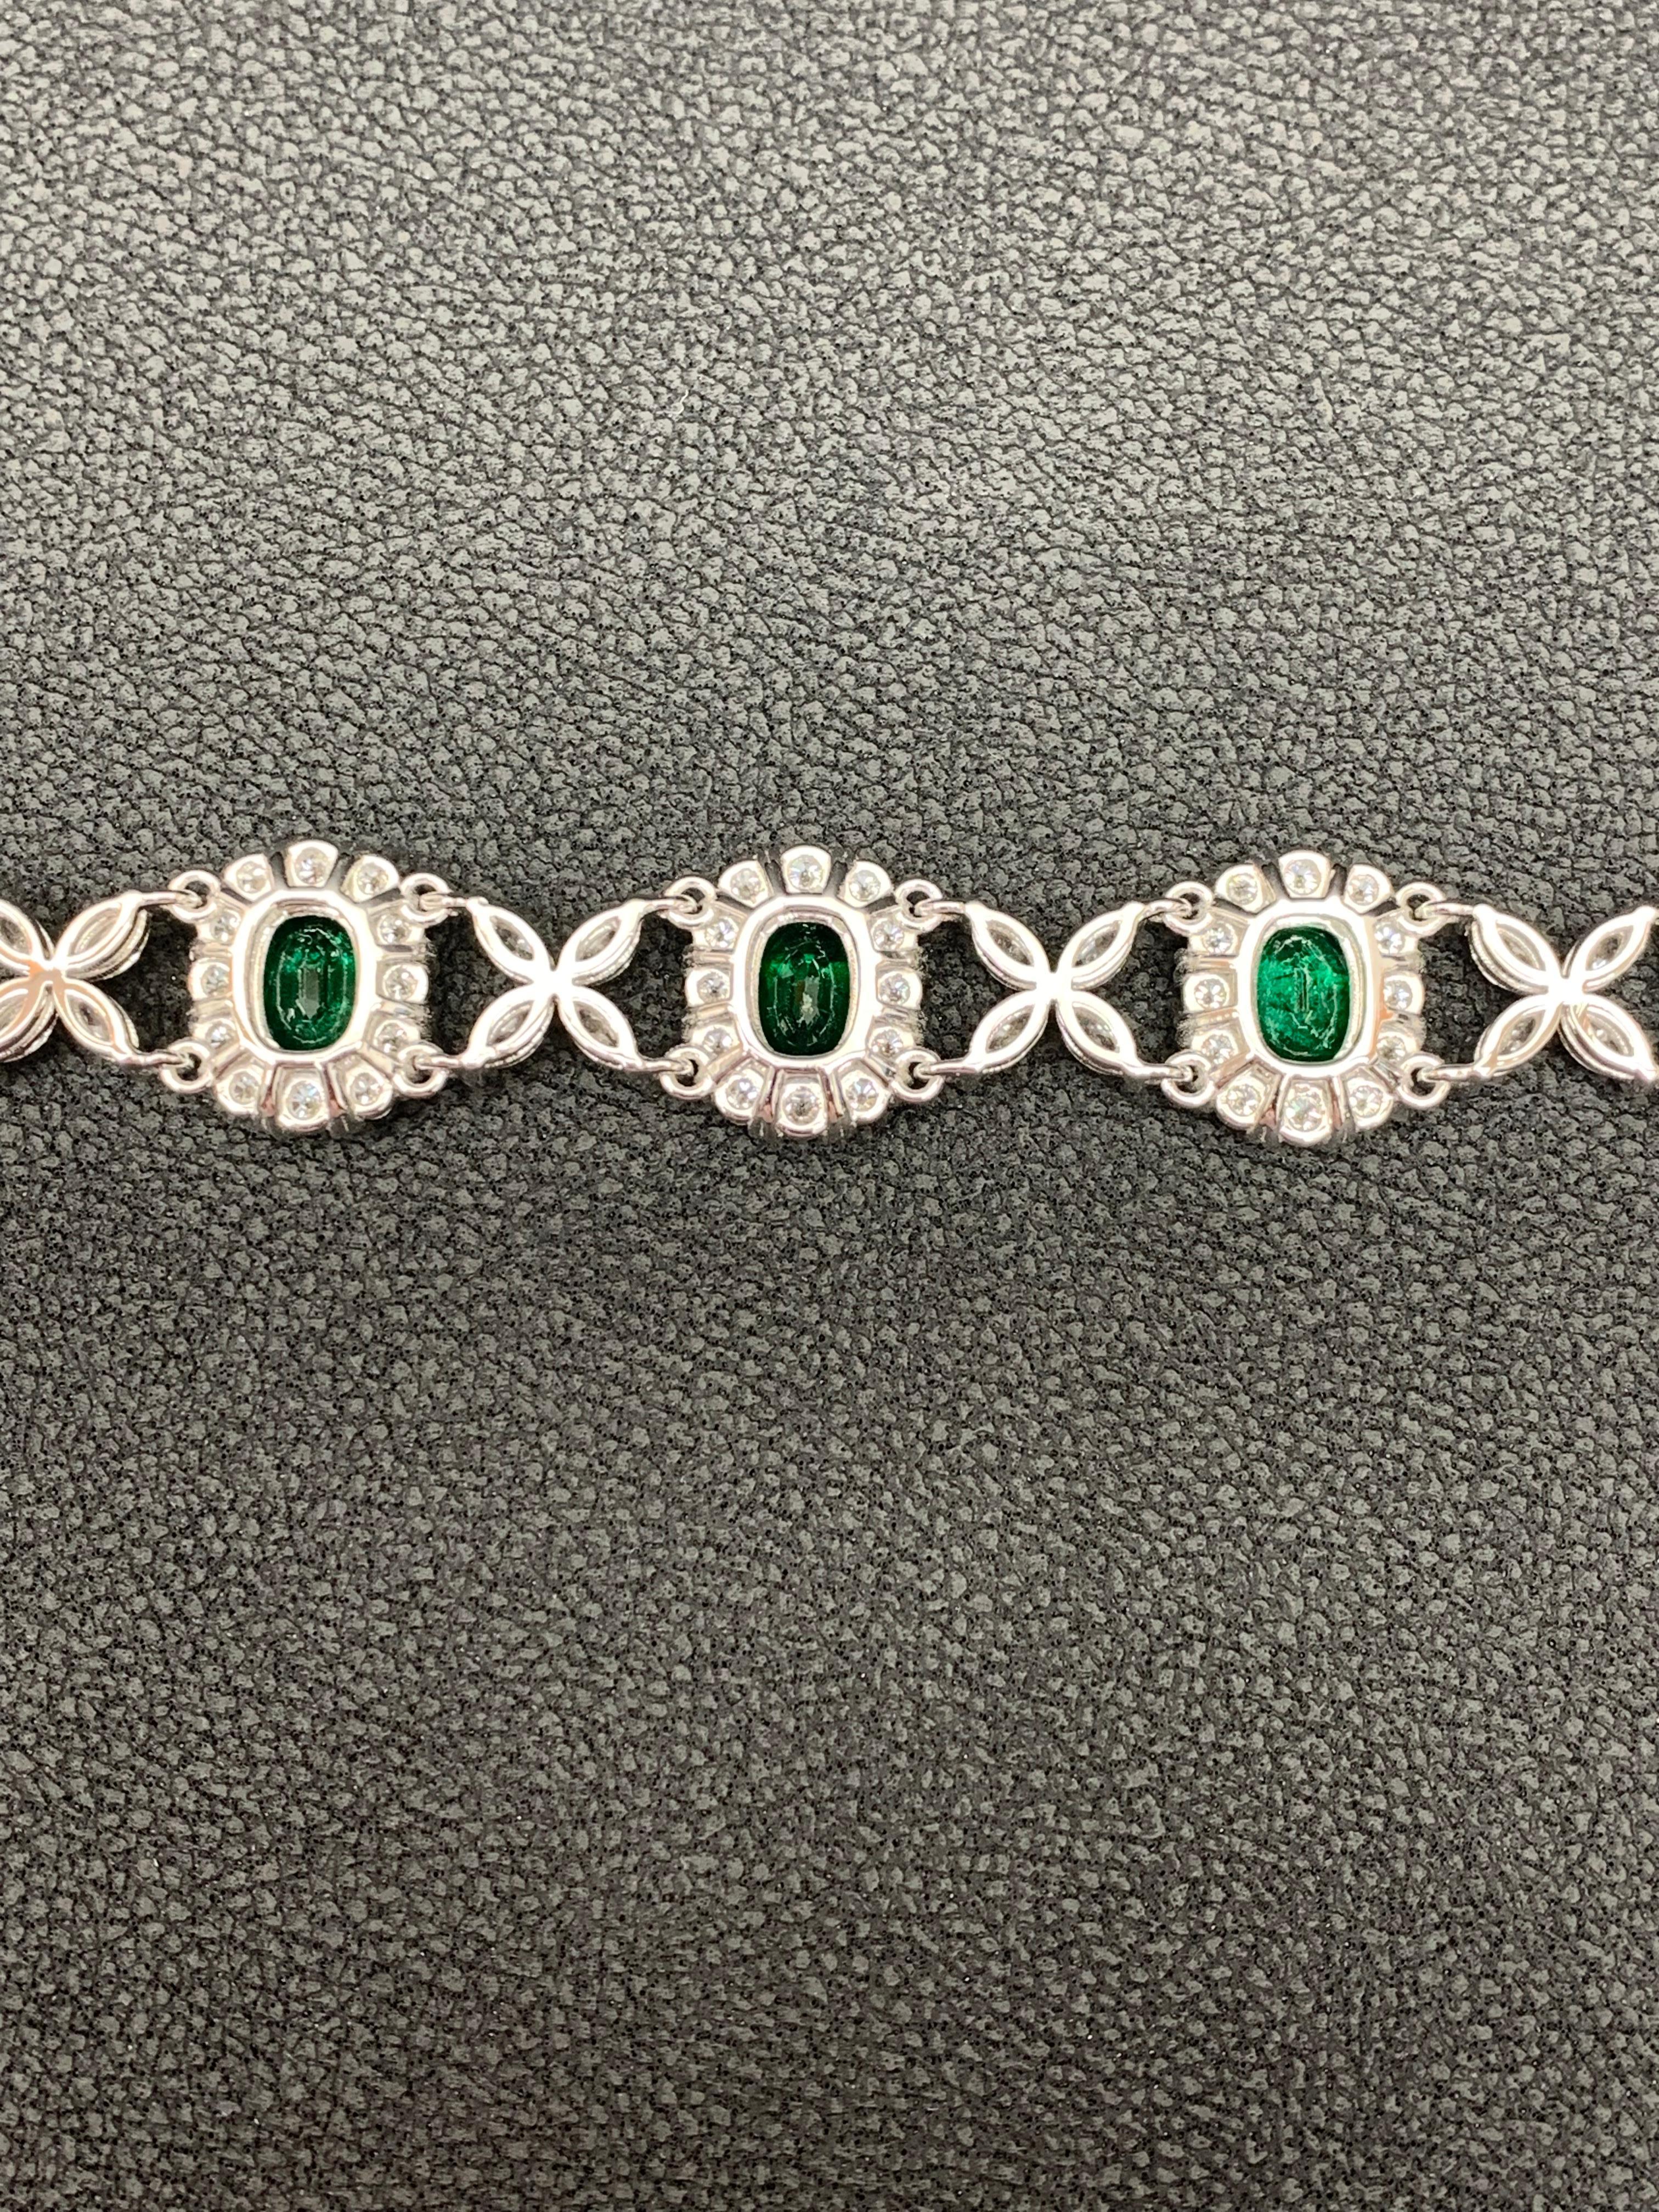 10.52 Carat Oval Cut Emerald and Diamond Tennis Bracelet in 14K White Gold For Sale 1